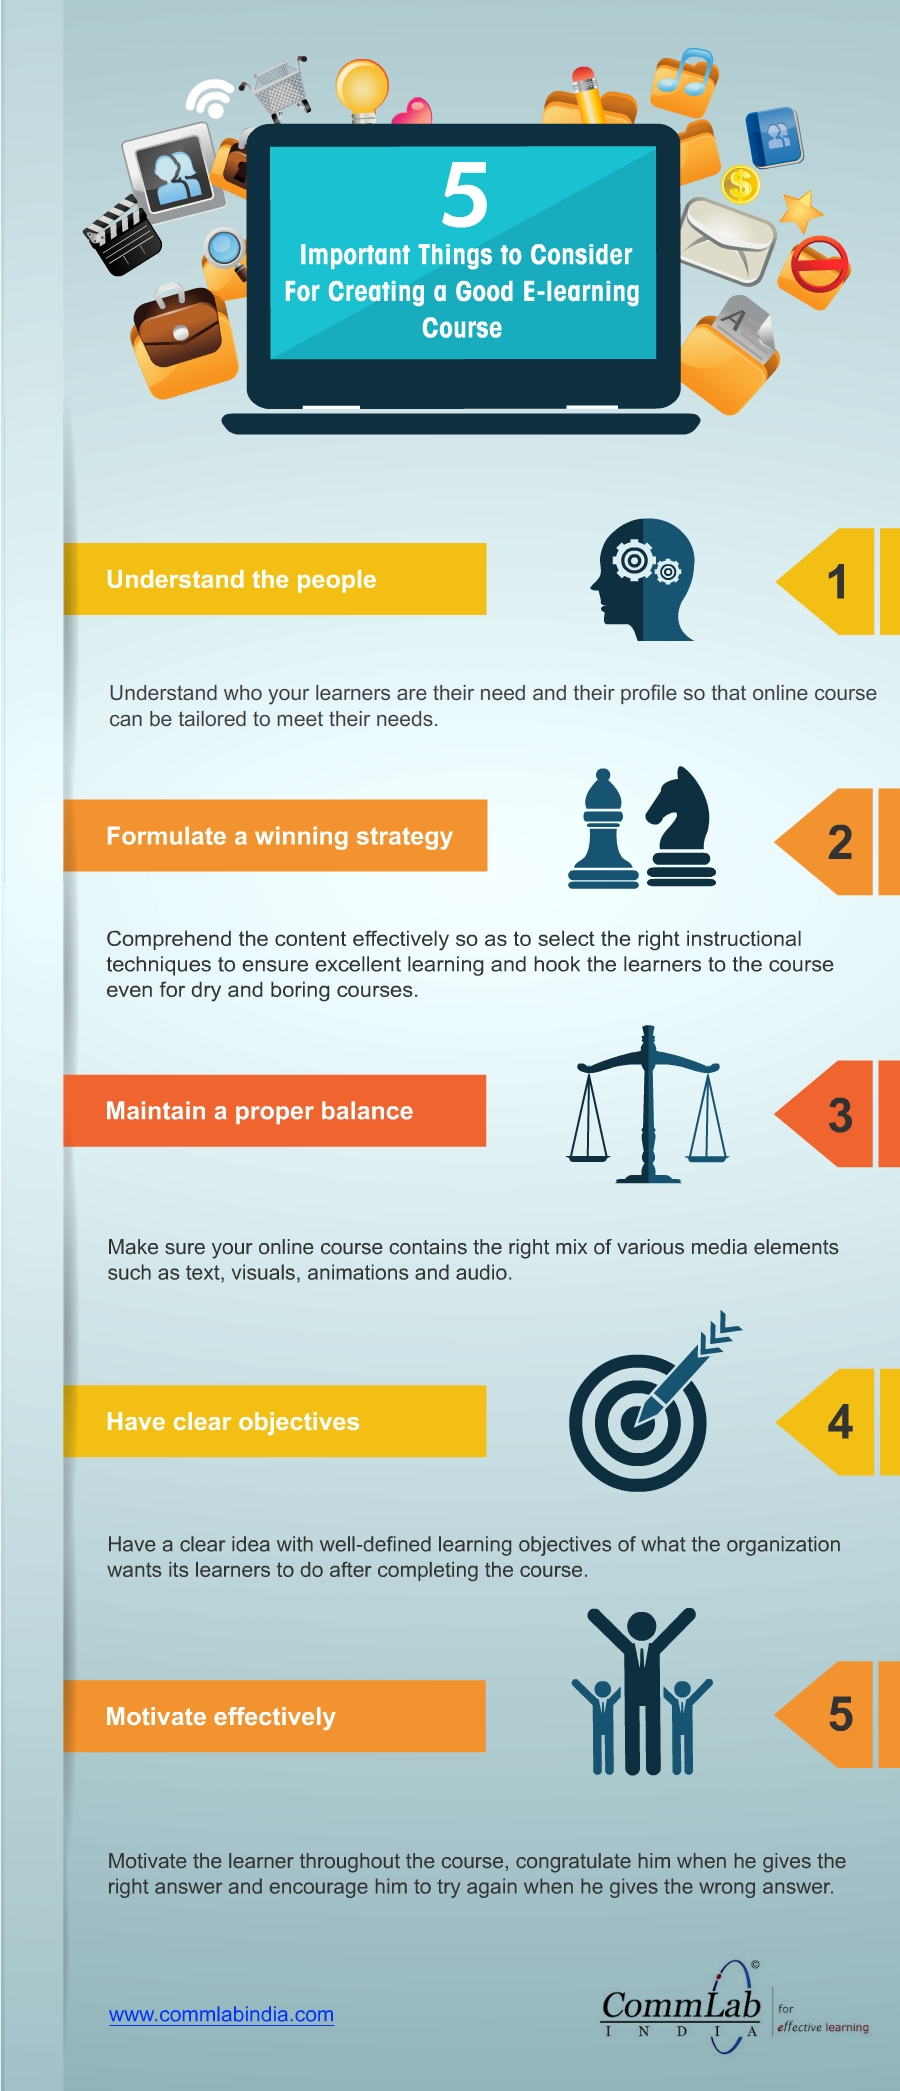 5 Important Things To Consider For Creating Good E-learning Course - An Infographic